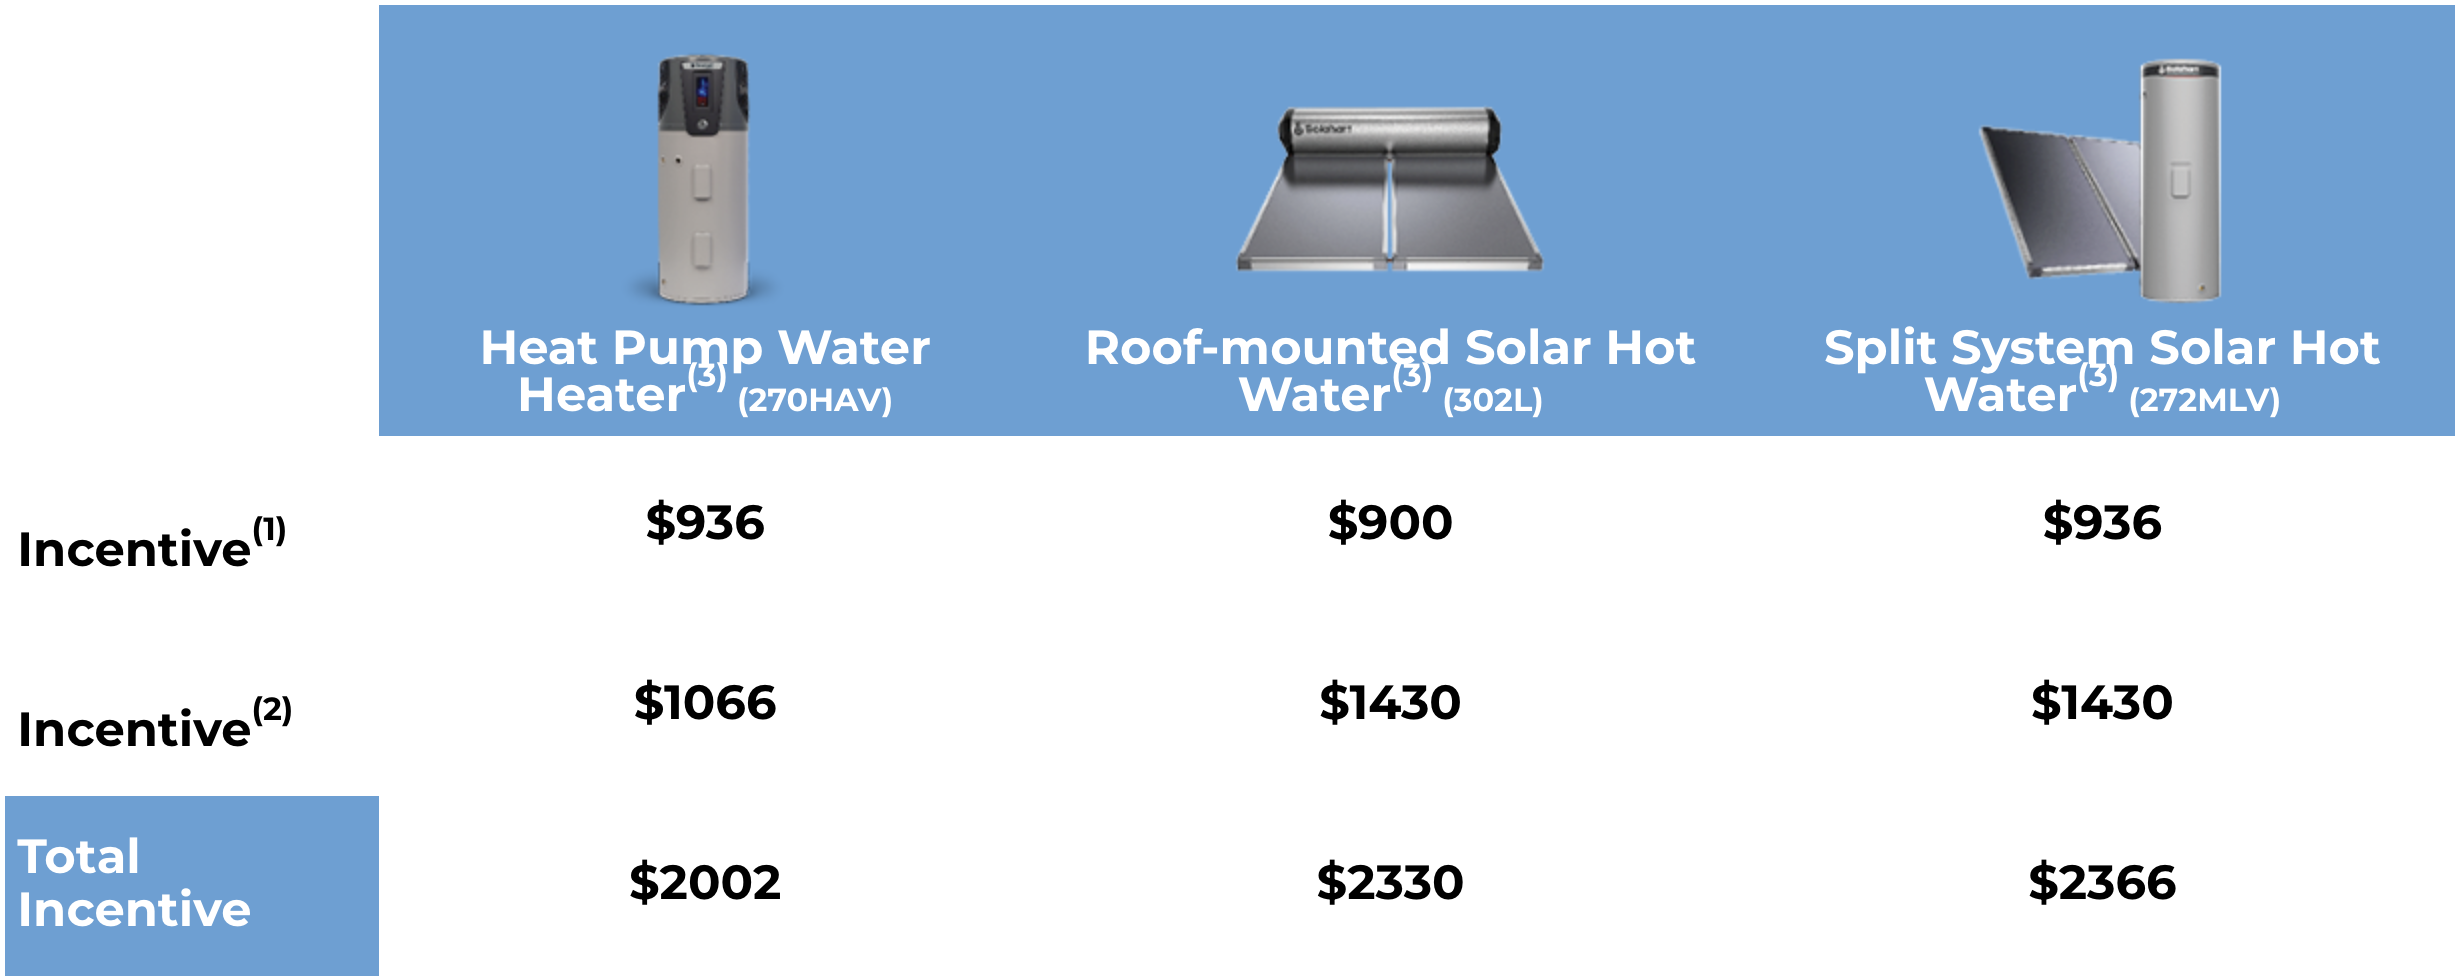 Solahart hot water system comparison chart